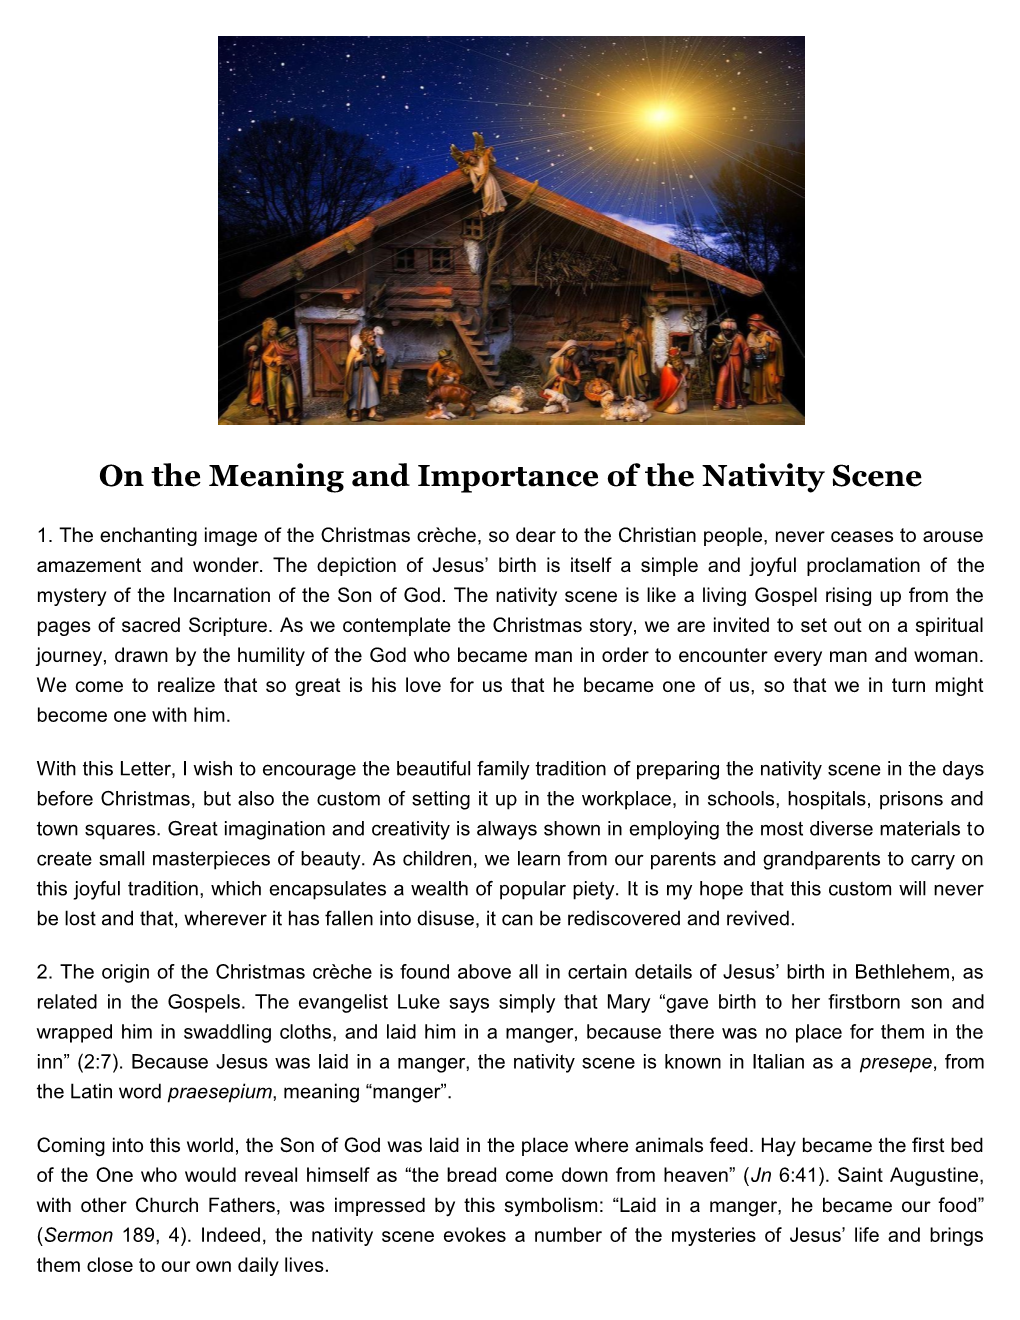 On the Meaning and Importance of the Nativity Scene